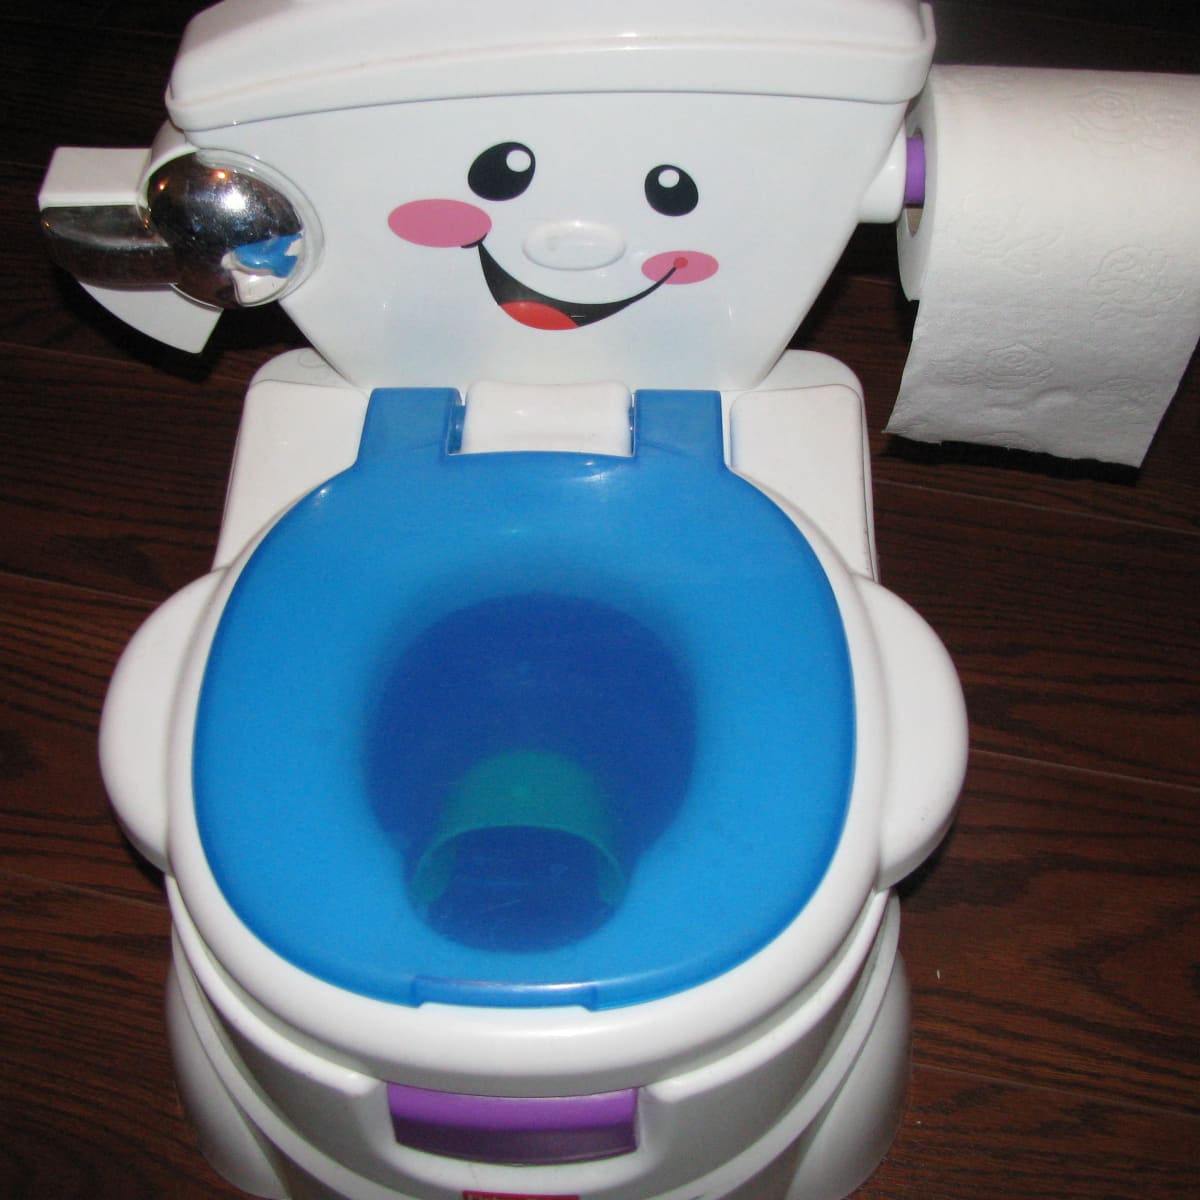 KIDS POTTY CHAIR SEAT BABY TODDLER TRAINING CHILDREN REMOVABLE TOILET SEAT PRO U 